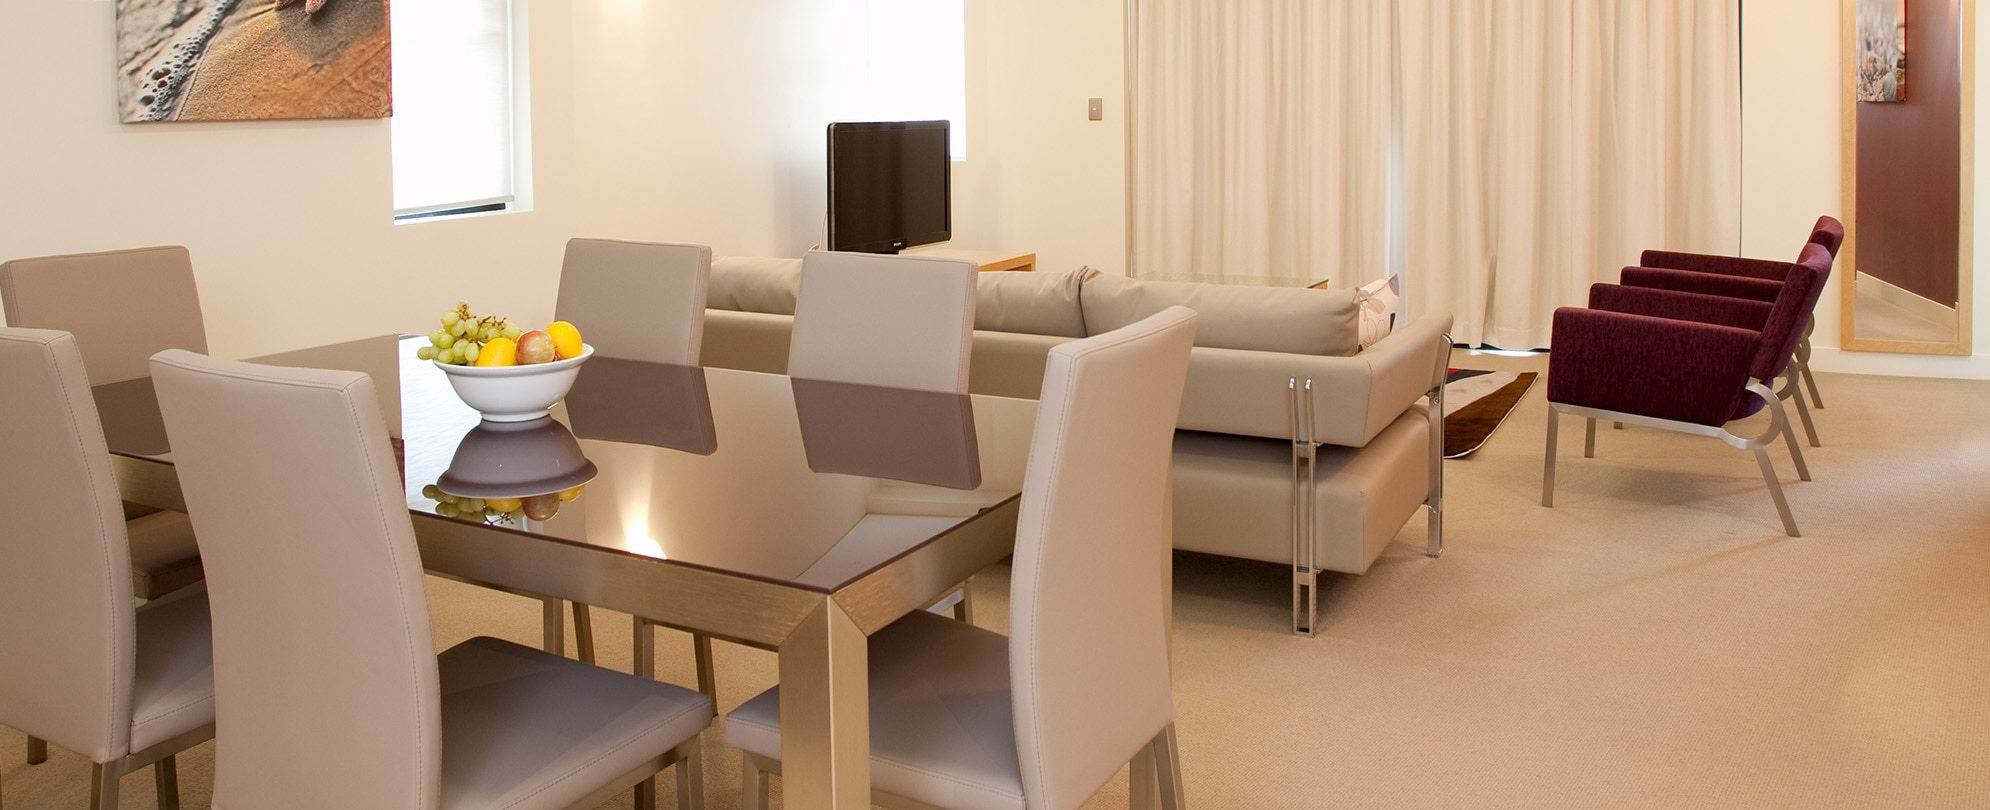 The living and dining area of a 2-bedroom deluxe suite at Club Wyndham Coffs Harbor.